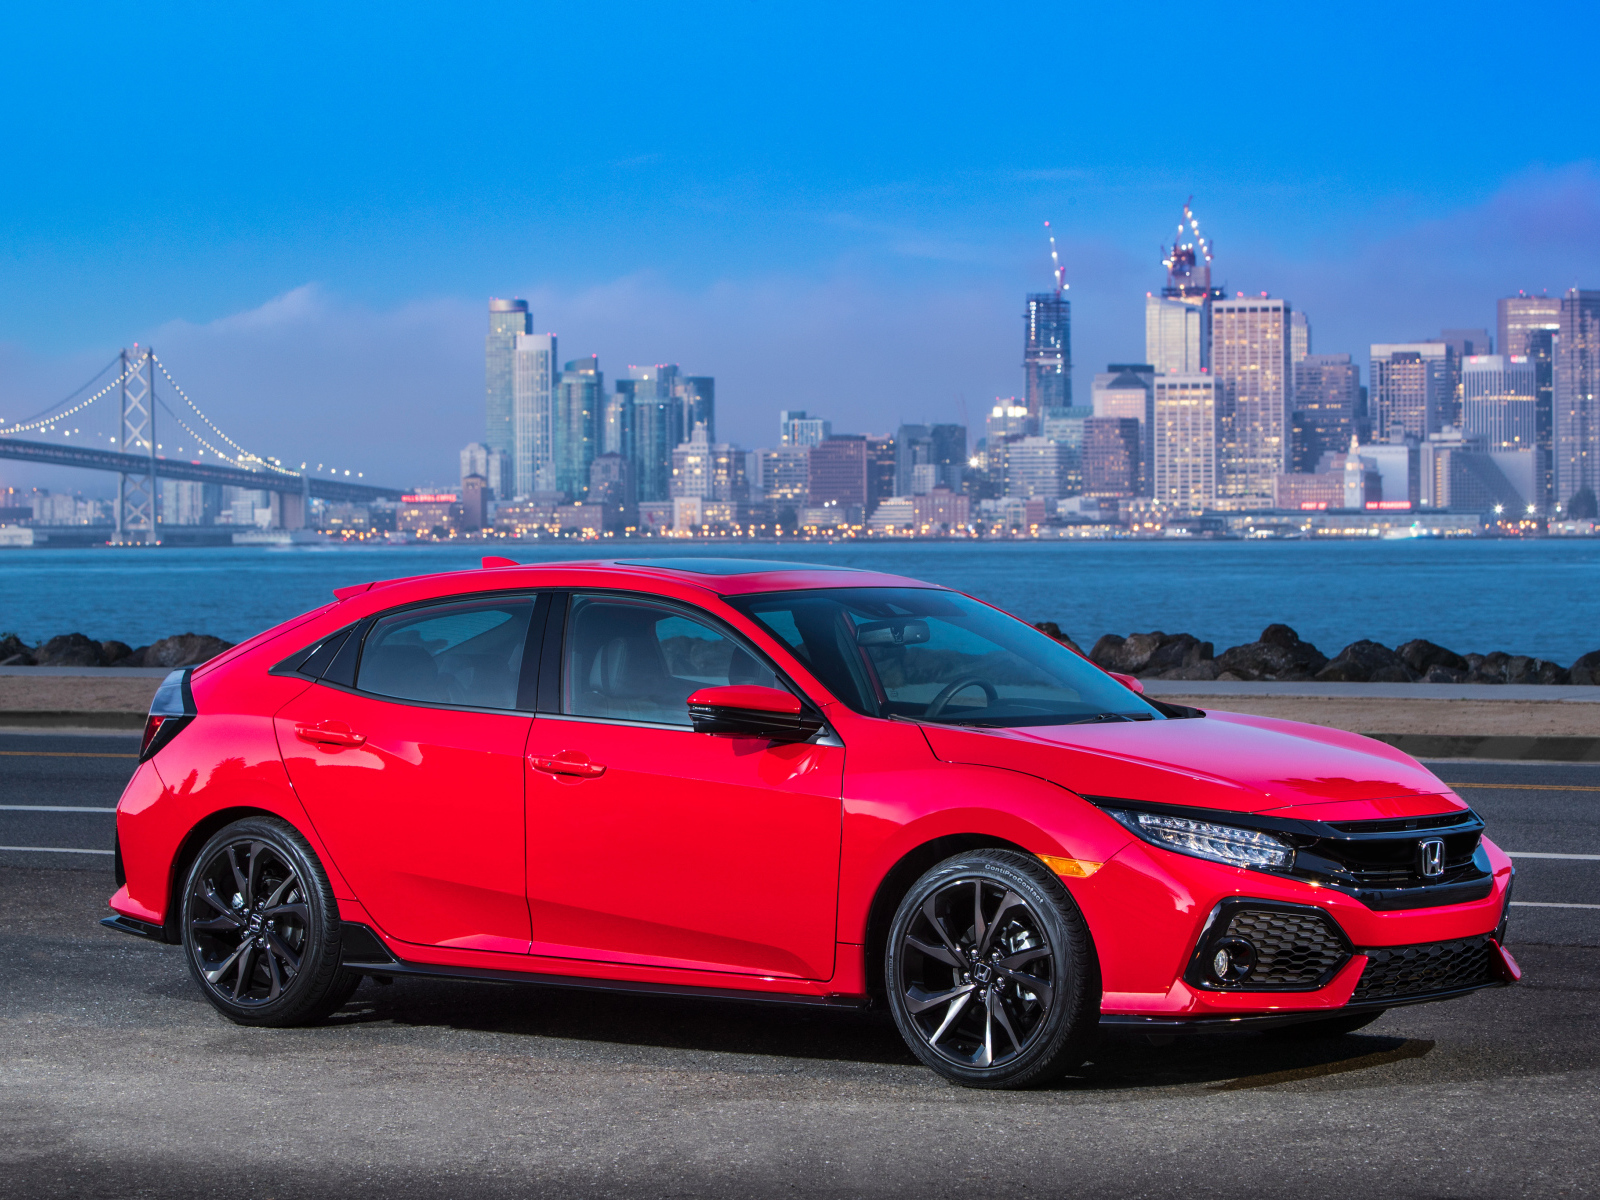 Red car Honda Civic Touring Hatchback, 2017 against the background of the city